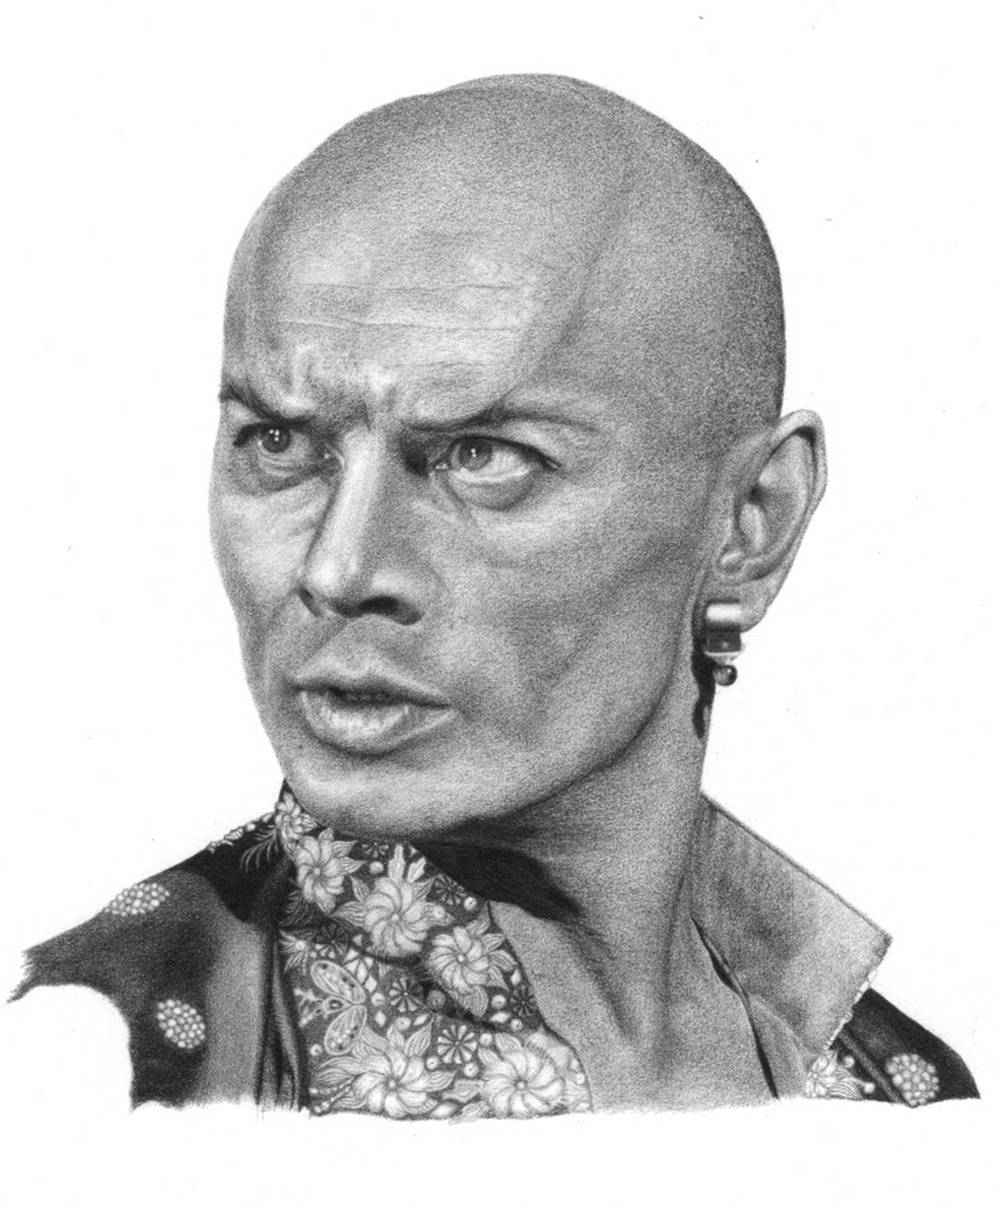 A striking sketch of legendary actor Yul Brynner as King Mongkut in 'The King And I' Wallpaper